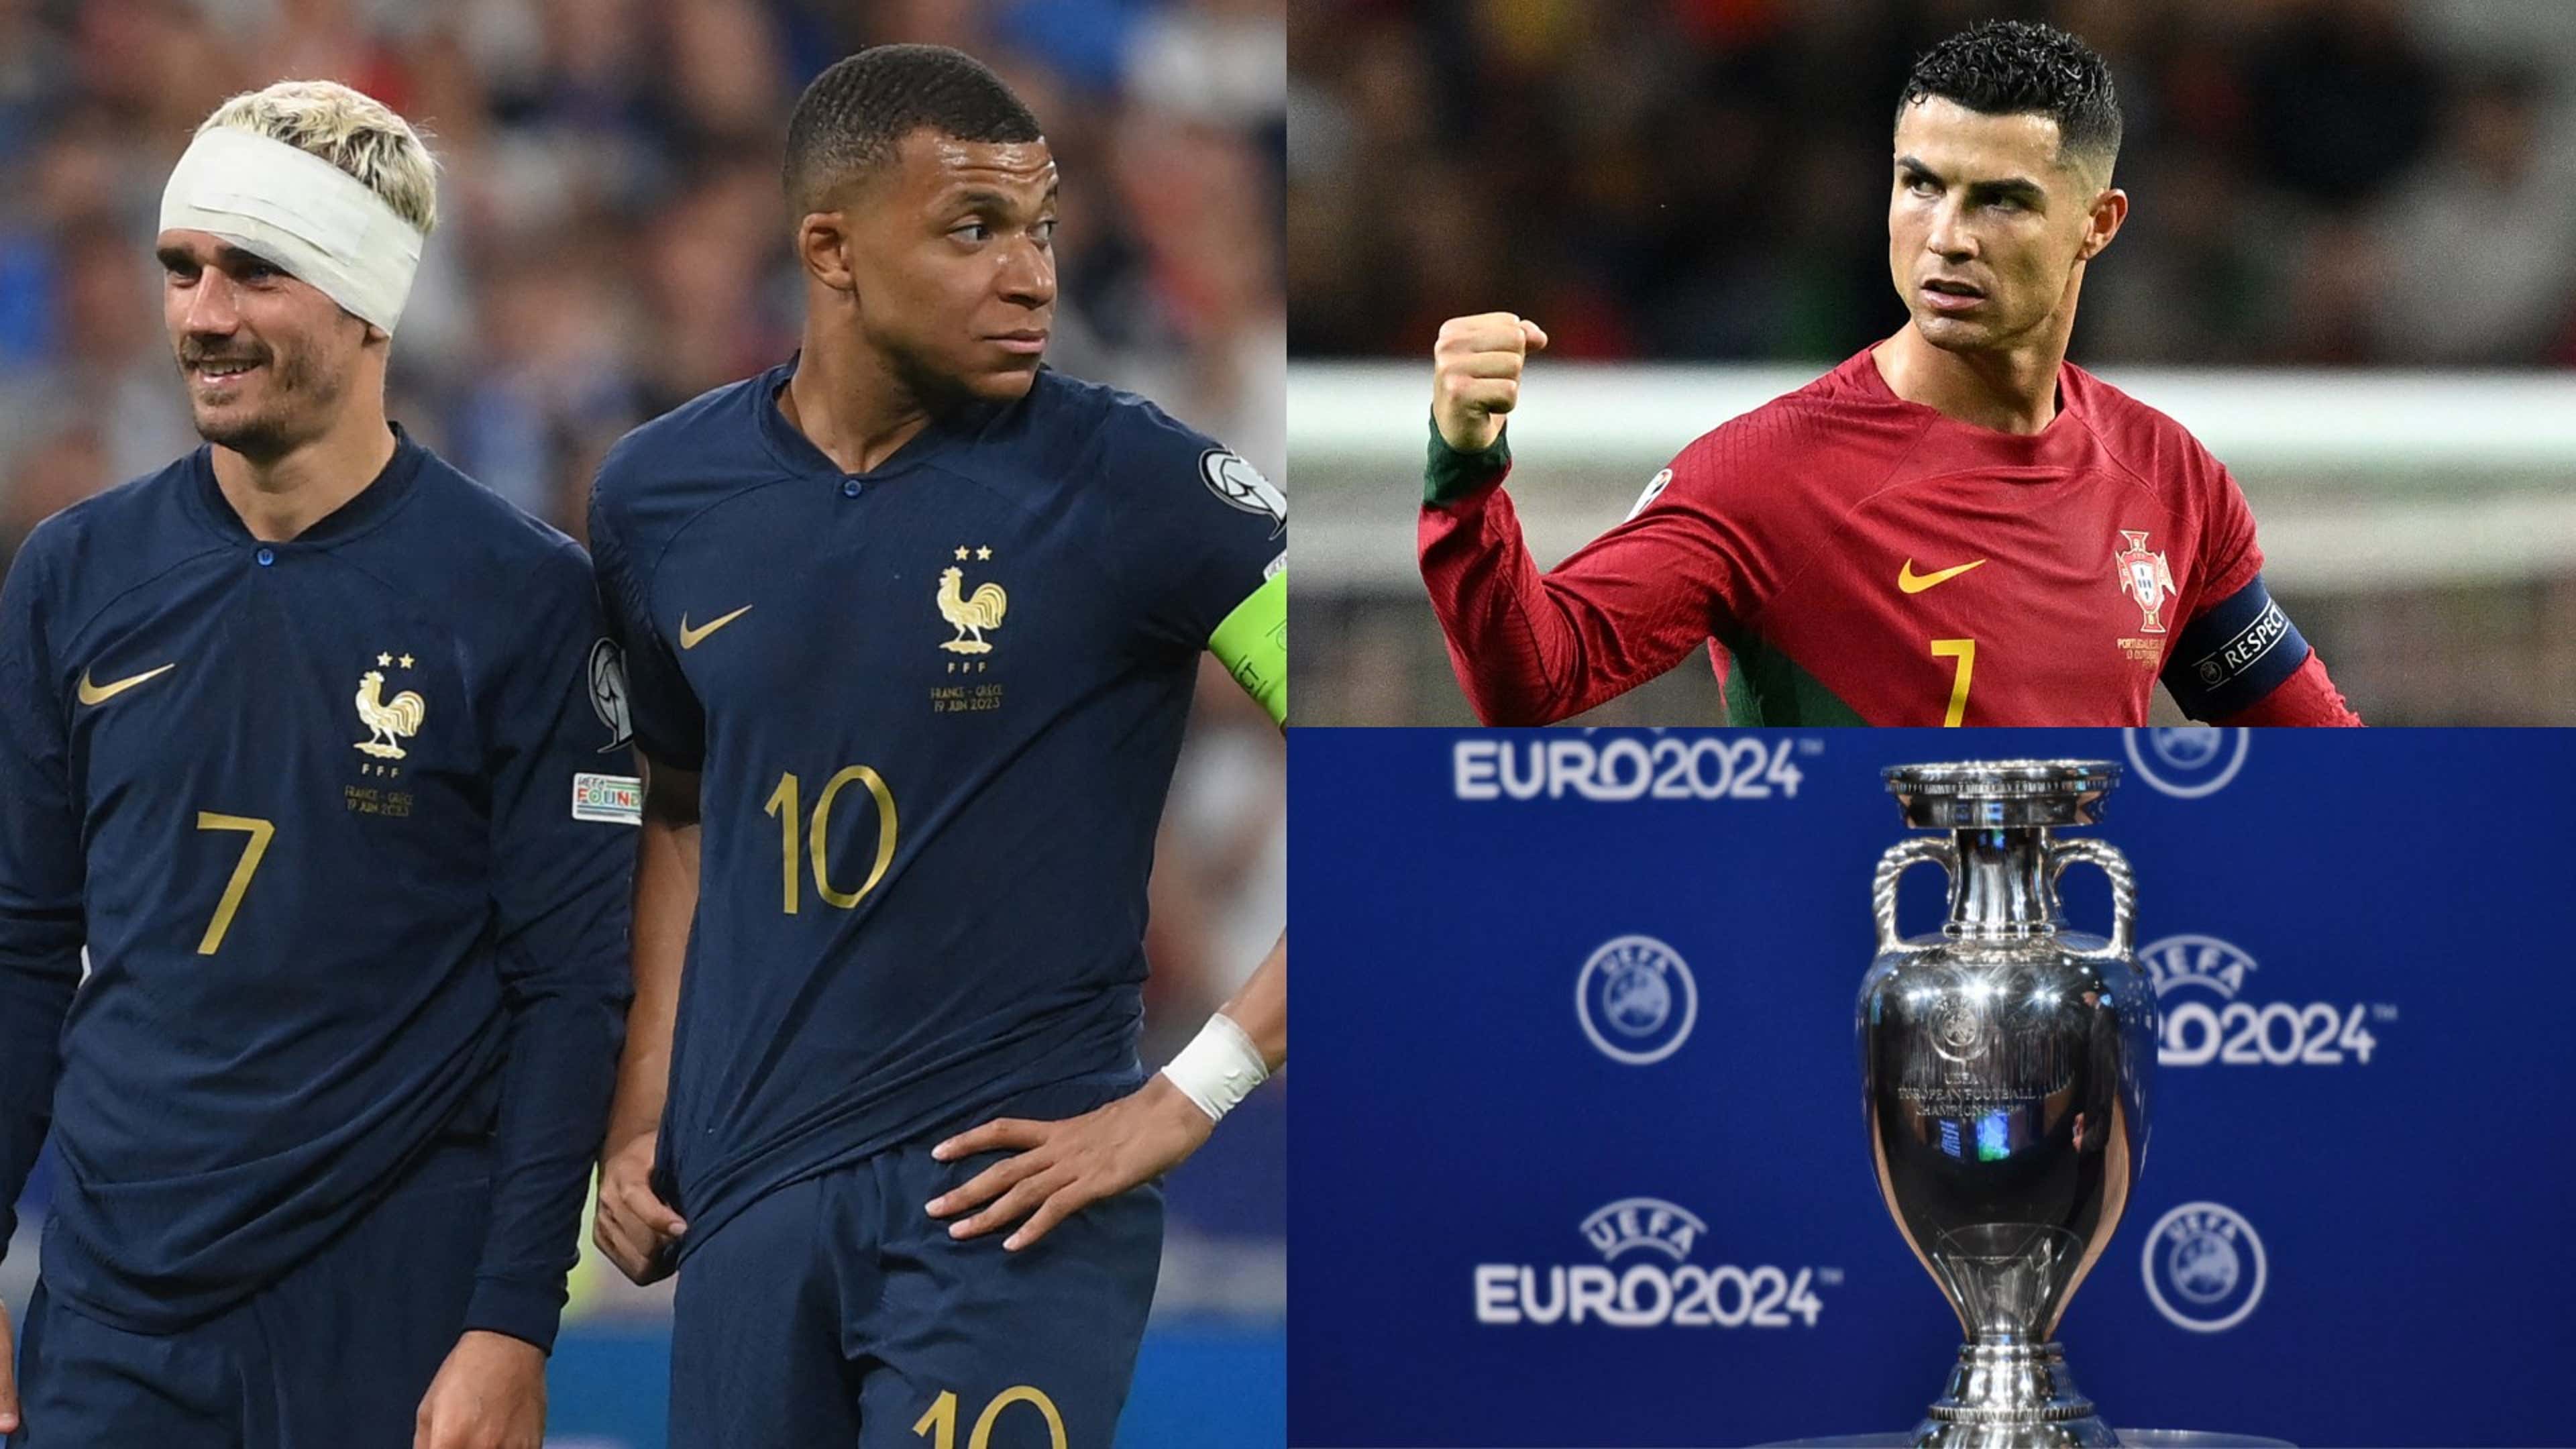 Euro 2024: Which teams have qualified for the European Championship?